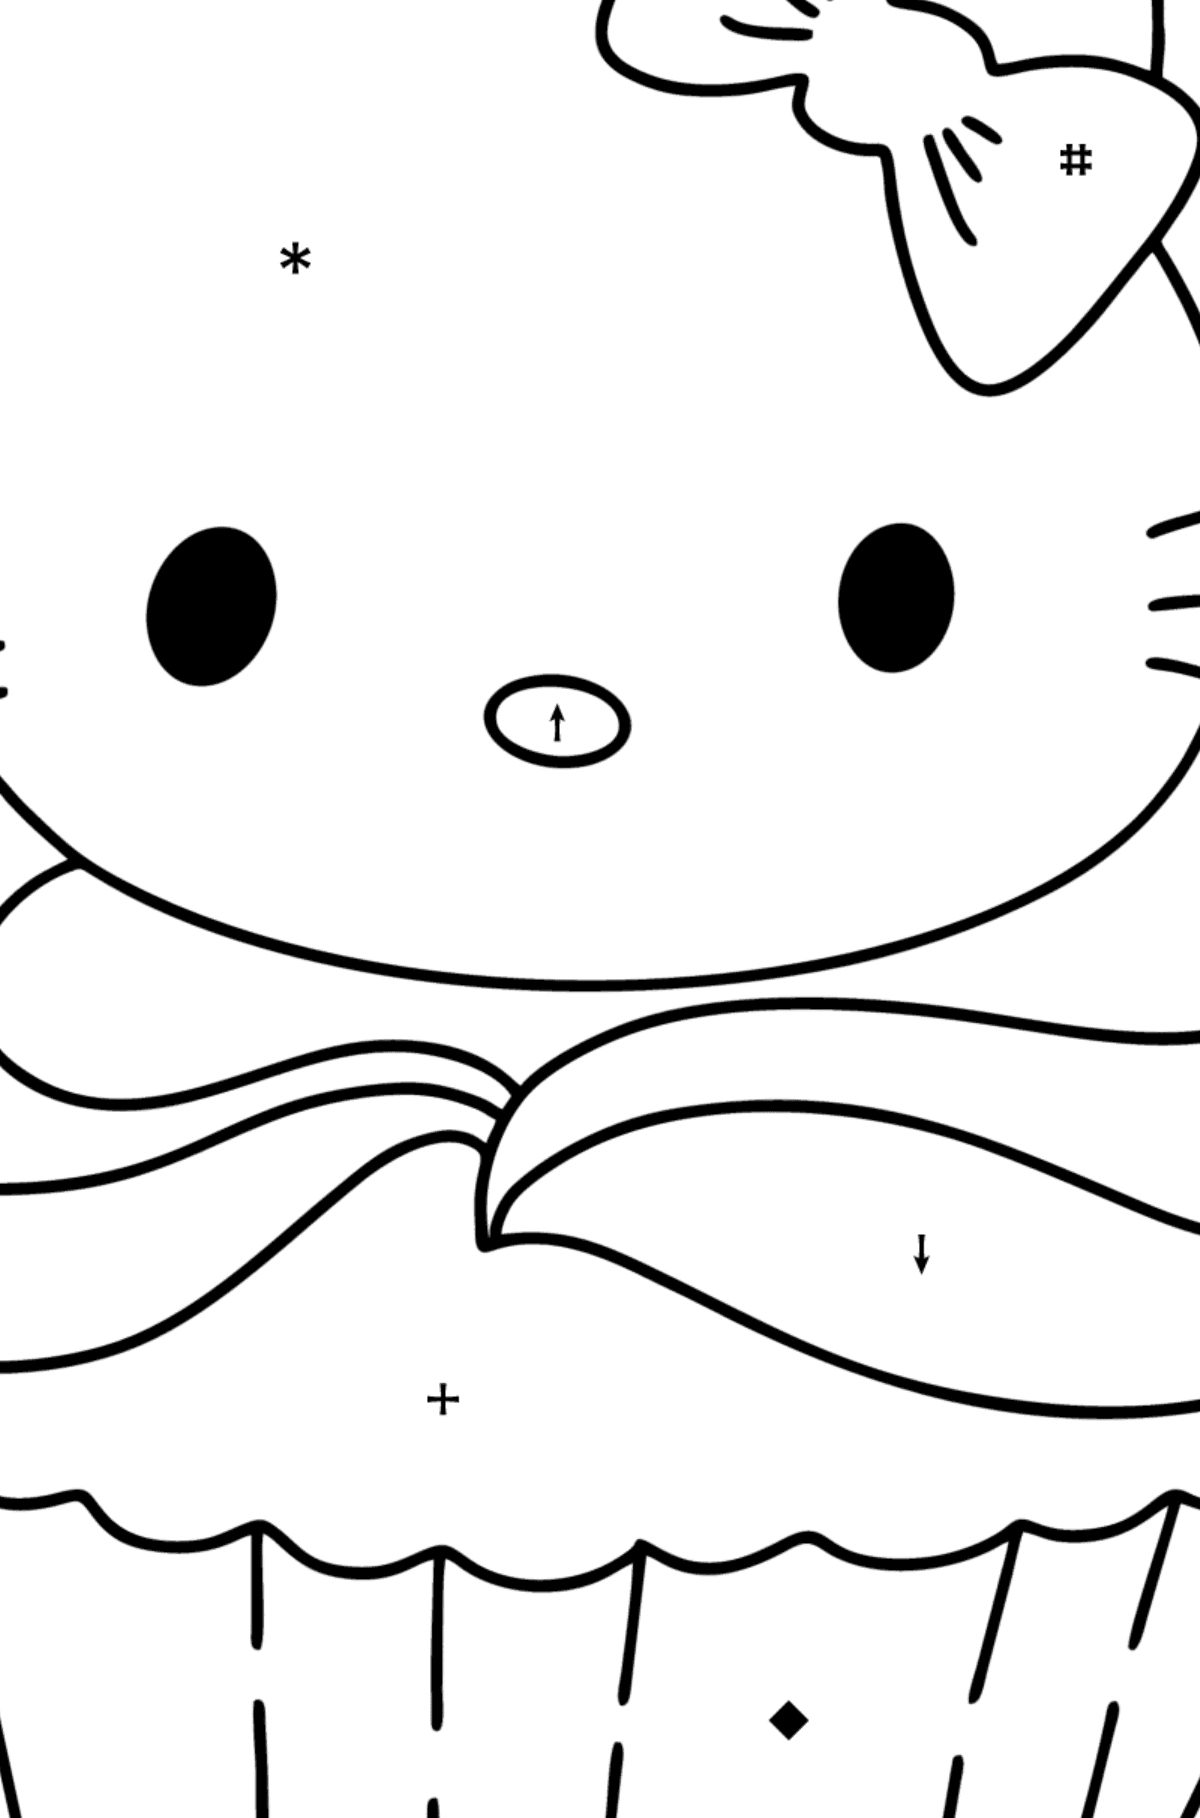 Hello Kitty cupcake coloring page - Coloring by Symbols for Kids